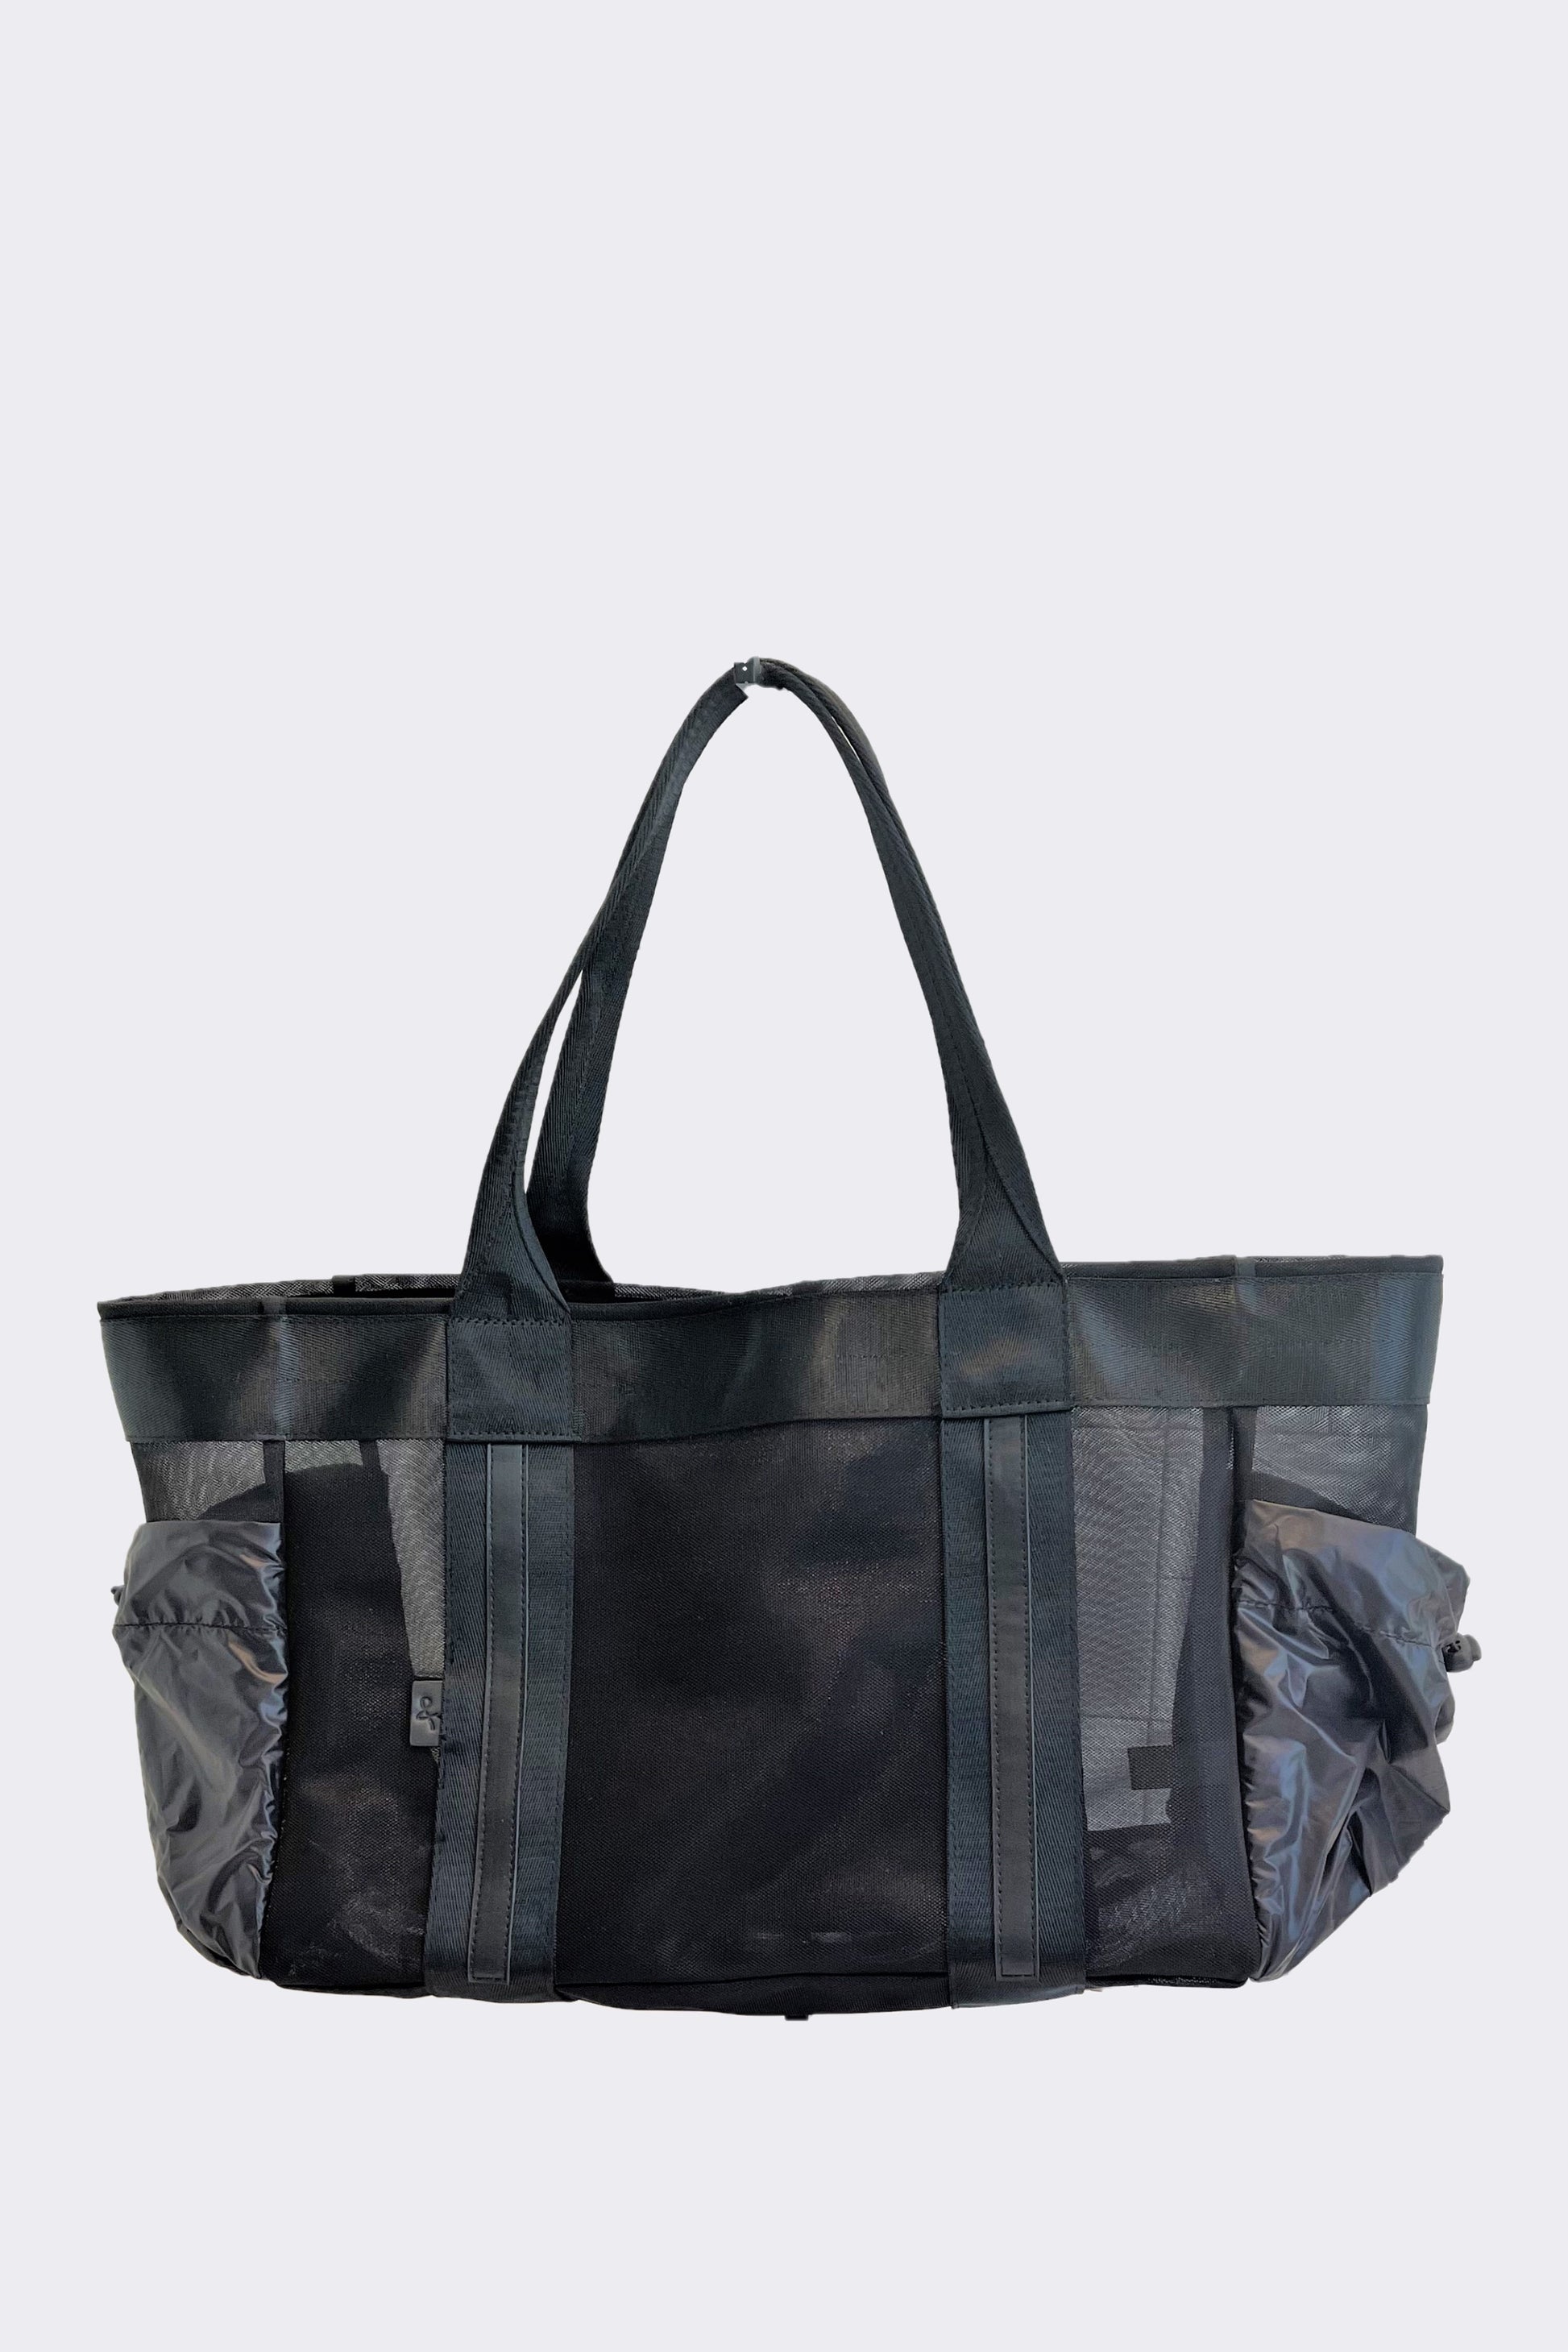 medium sized black mesh beach bag with leather details